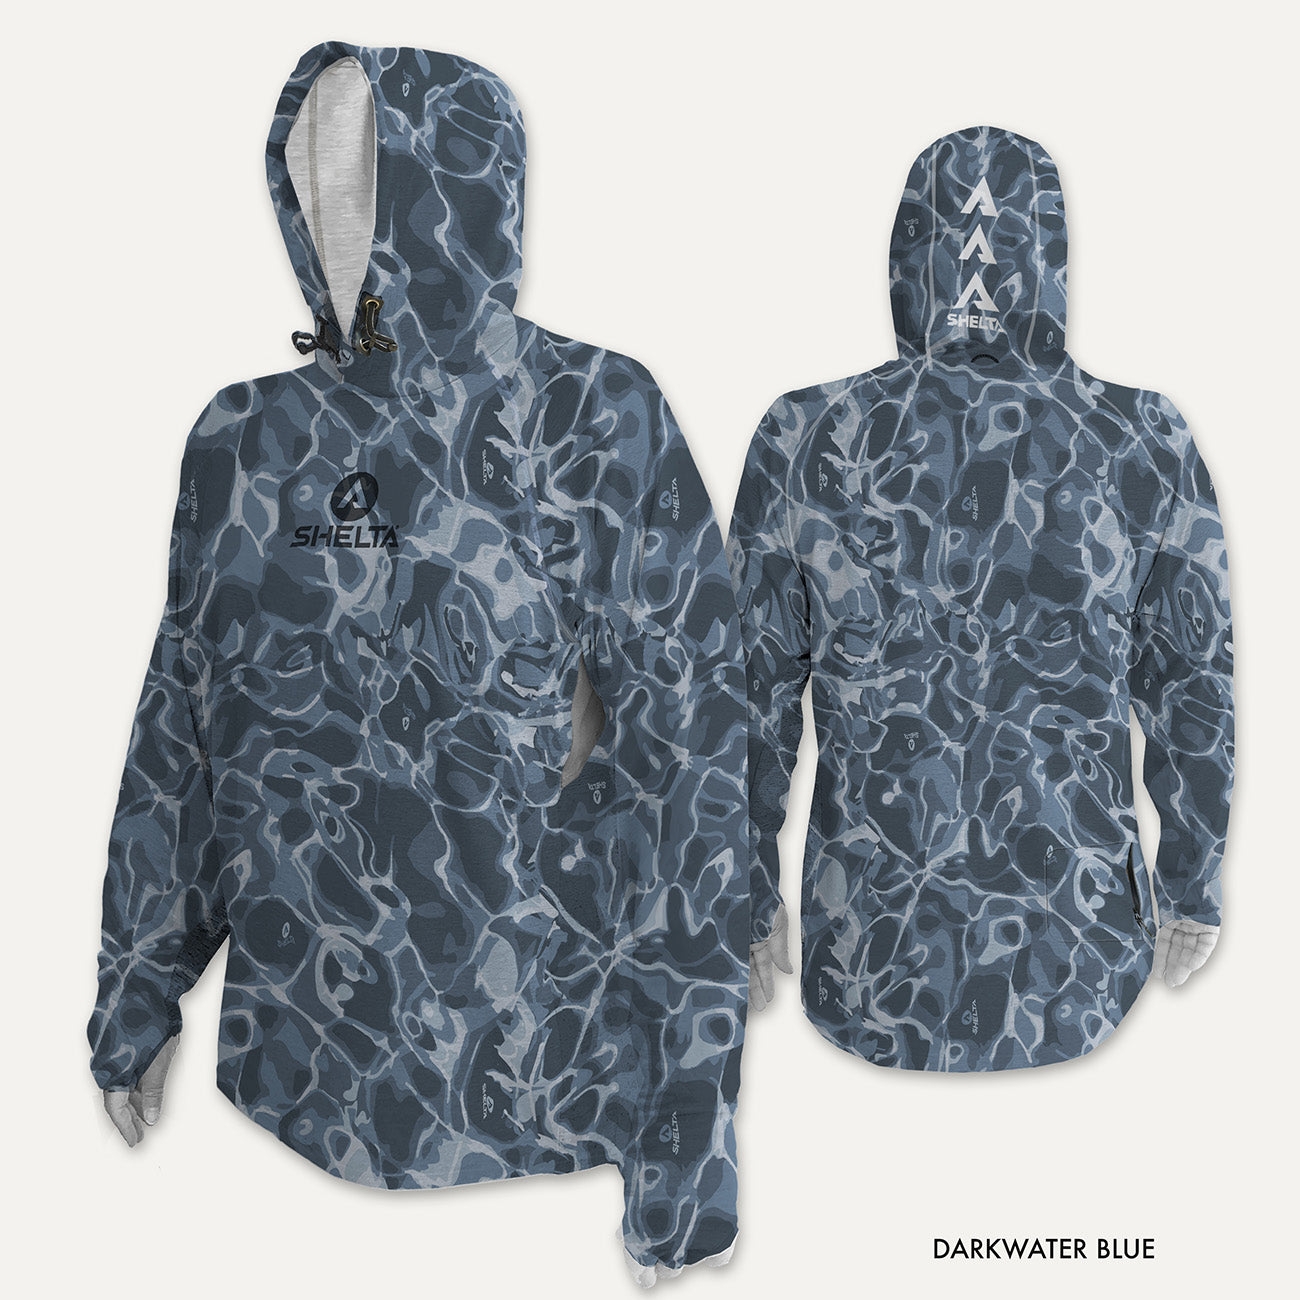 The Assault Hoodie in Dark Water is engineered & built with sun protection, function, and durability in mind. Offering features consistent with Shelta core values and innovation goals. UPF 50+ UV protection, the highest rating given. Blocks 98% of UVA/UVB radiation Loose comfort fit Moisture Wicking Sleeves with thumb hole & finger loop for multiple hand protection options